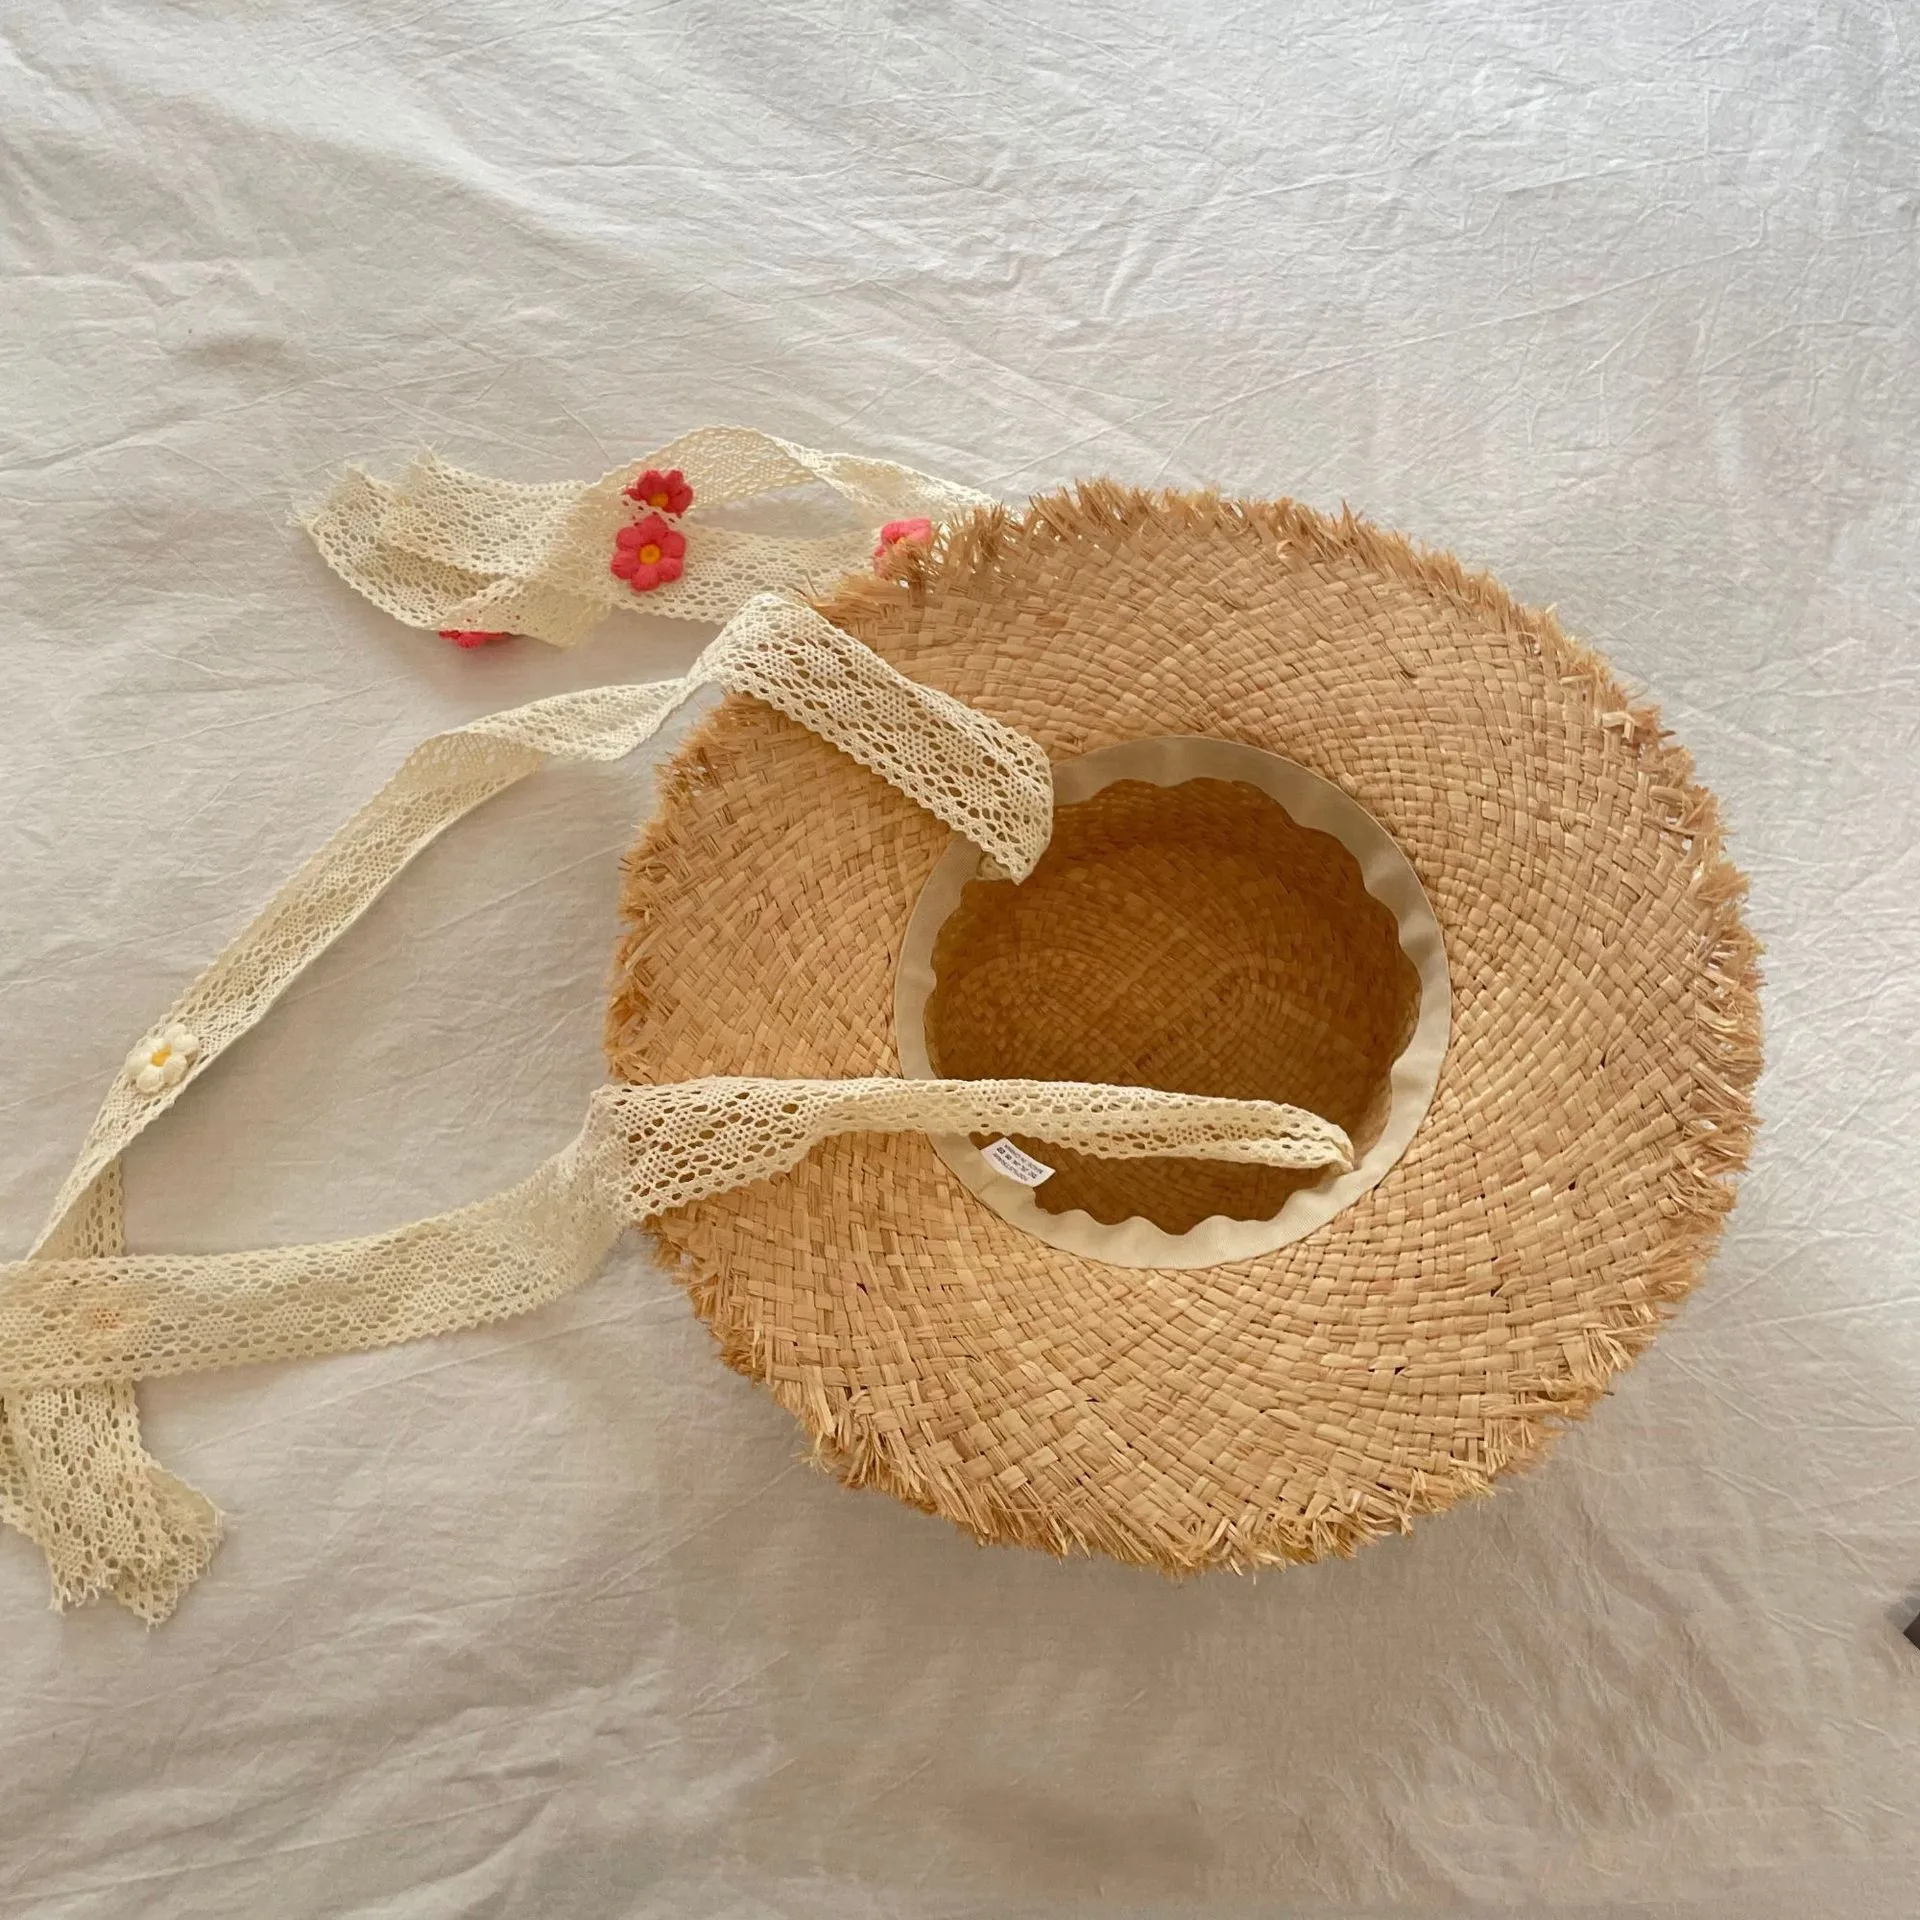 2023 Girls Spring and Summer New Sun Hat Children UV Protection Flower Lace with Large Eaves Straw Hat enlarge